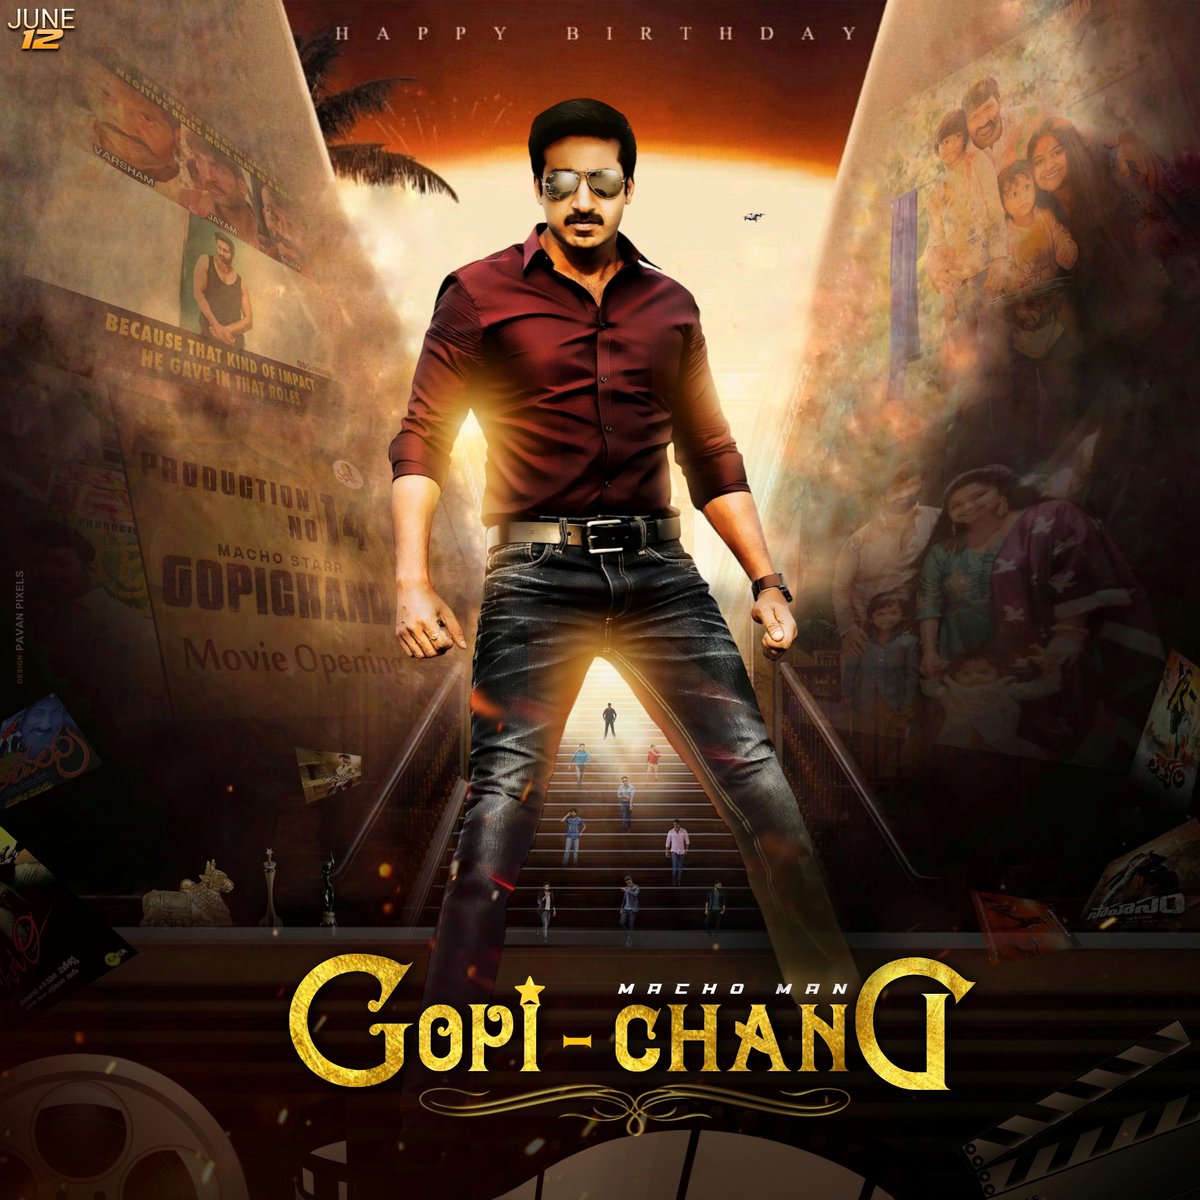 Here Is My Side CDP 💥♥️
Hope u all like it 🤩 @YoursGopichand 🥳

Eic - @PAVAN_PIXELS 🙂
#HBDGopiChand #Gopichand 
#HappyBirthdayGopichand #Gopichand31 #GopichandBCDP 

@TrendsGopiChand @GopiChandFc
@gopichandaslam @Gopichand_Fc